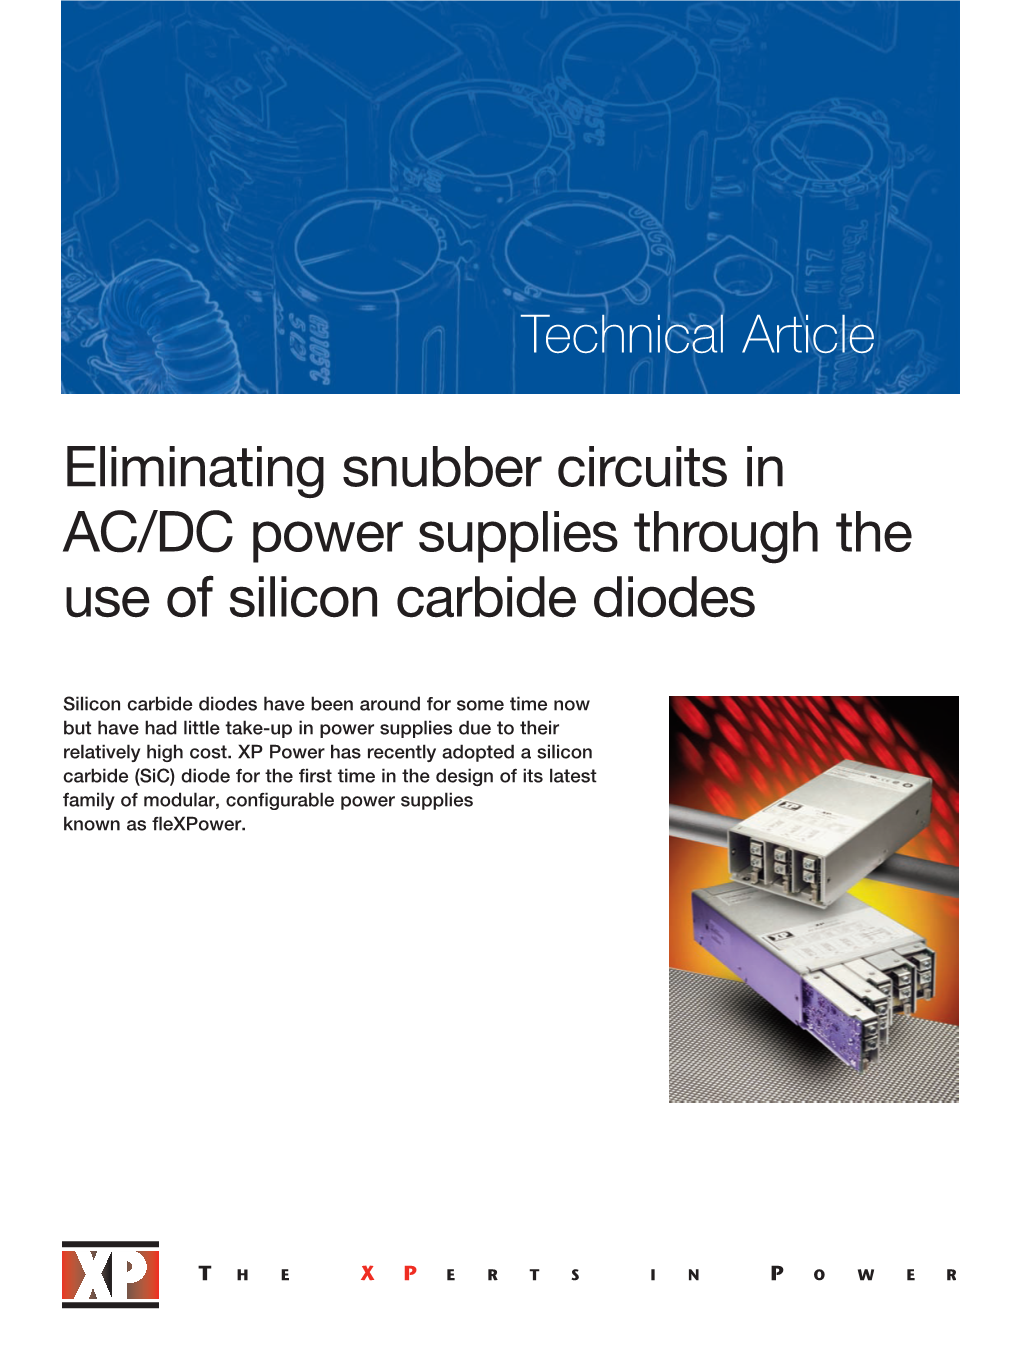 Eliminating Snubber Circuits in AC/DC Power Supplies Through the Use of Silicon Carbide Diodes